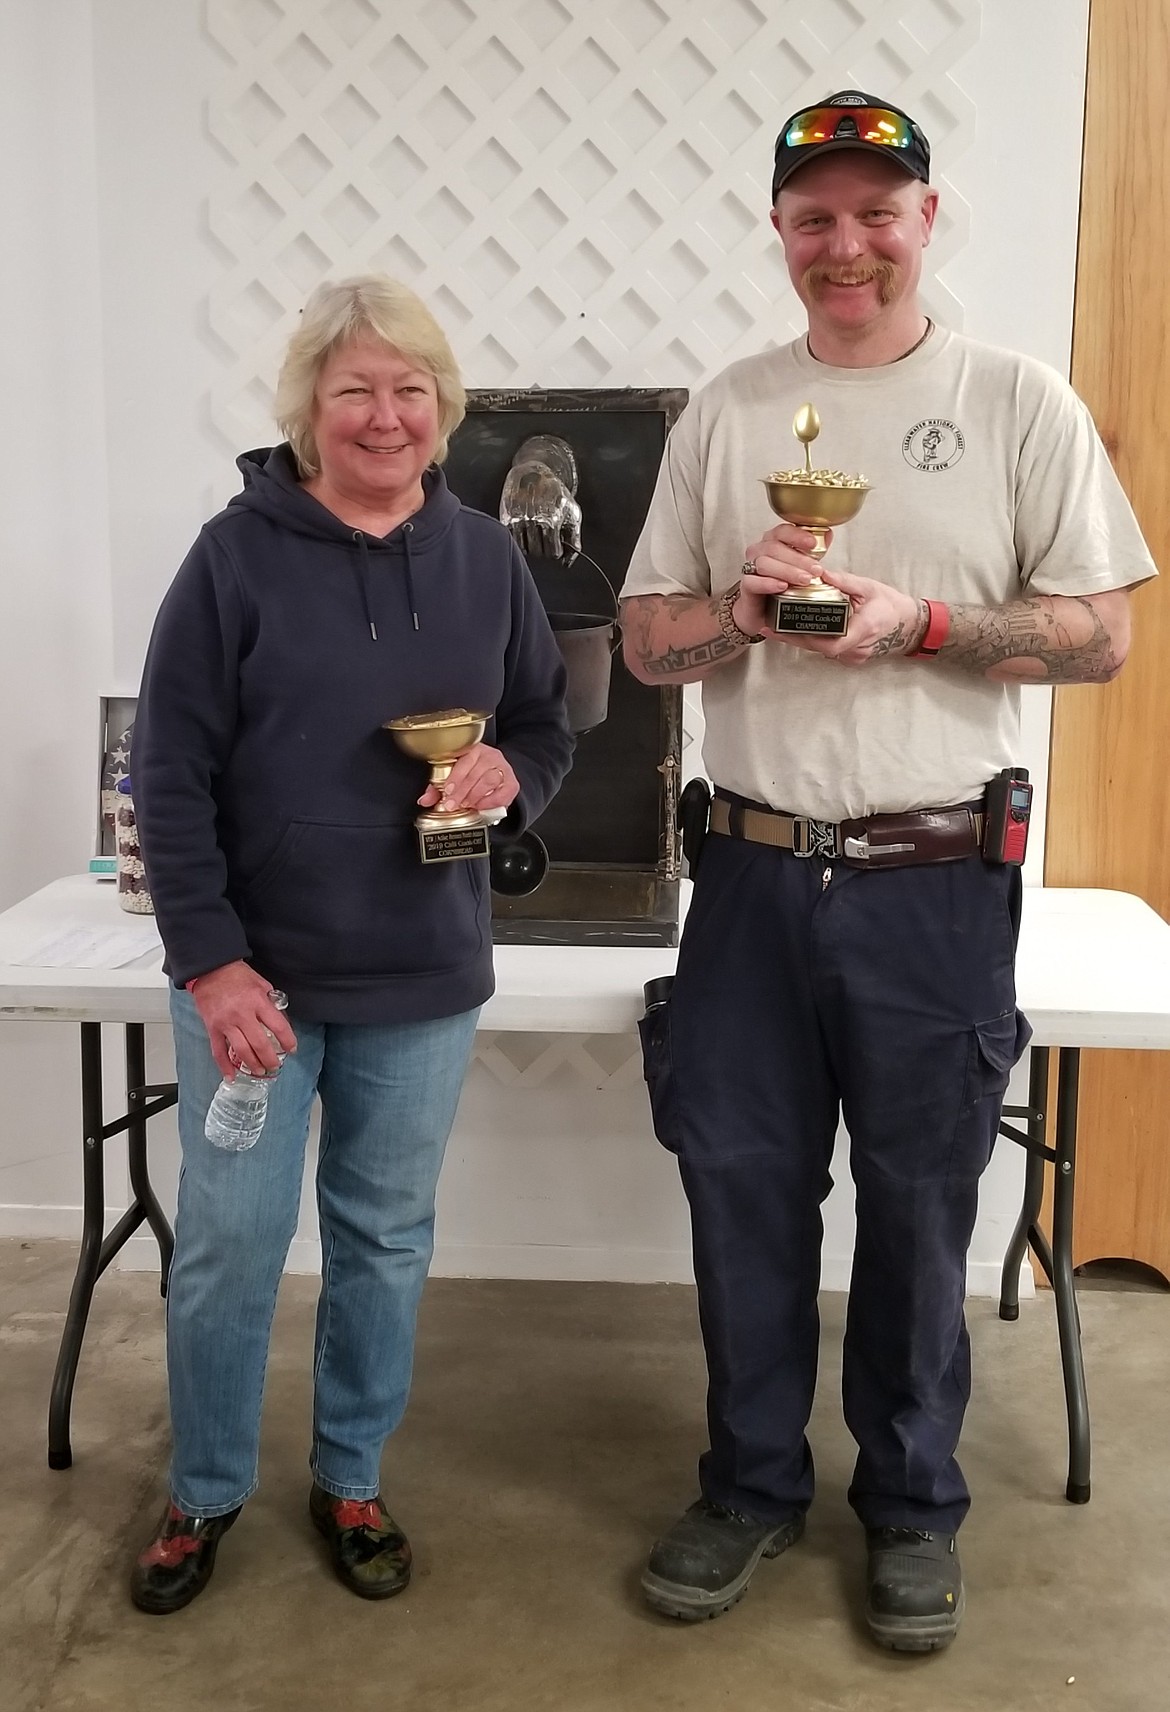 Photo by MANDI BATEMAN
Chili and cornbread winners, Lori Werder and Tom Chaney with their trophies.